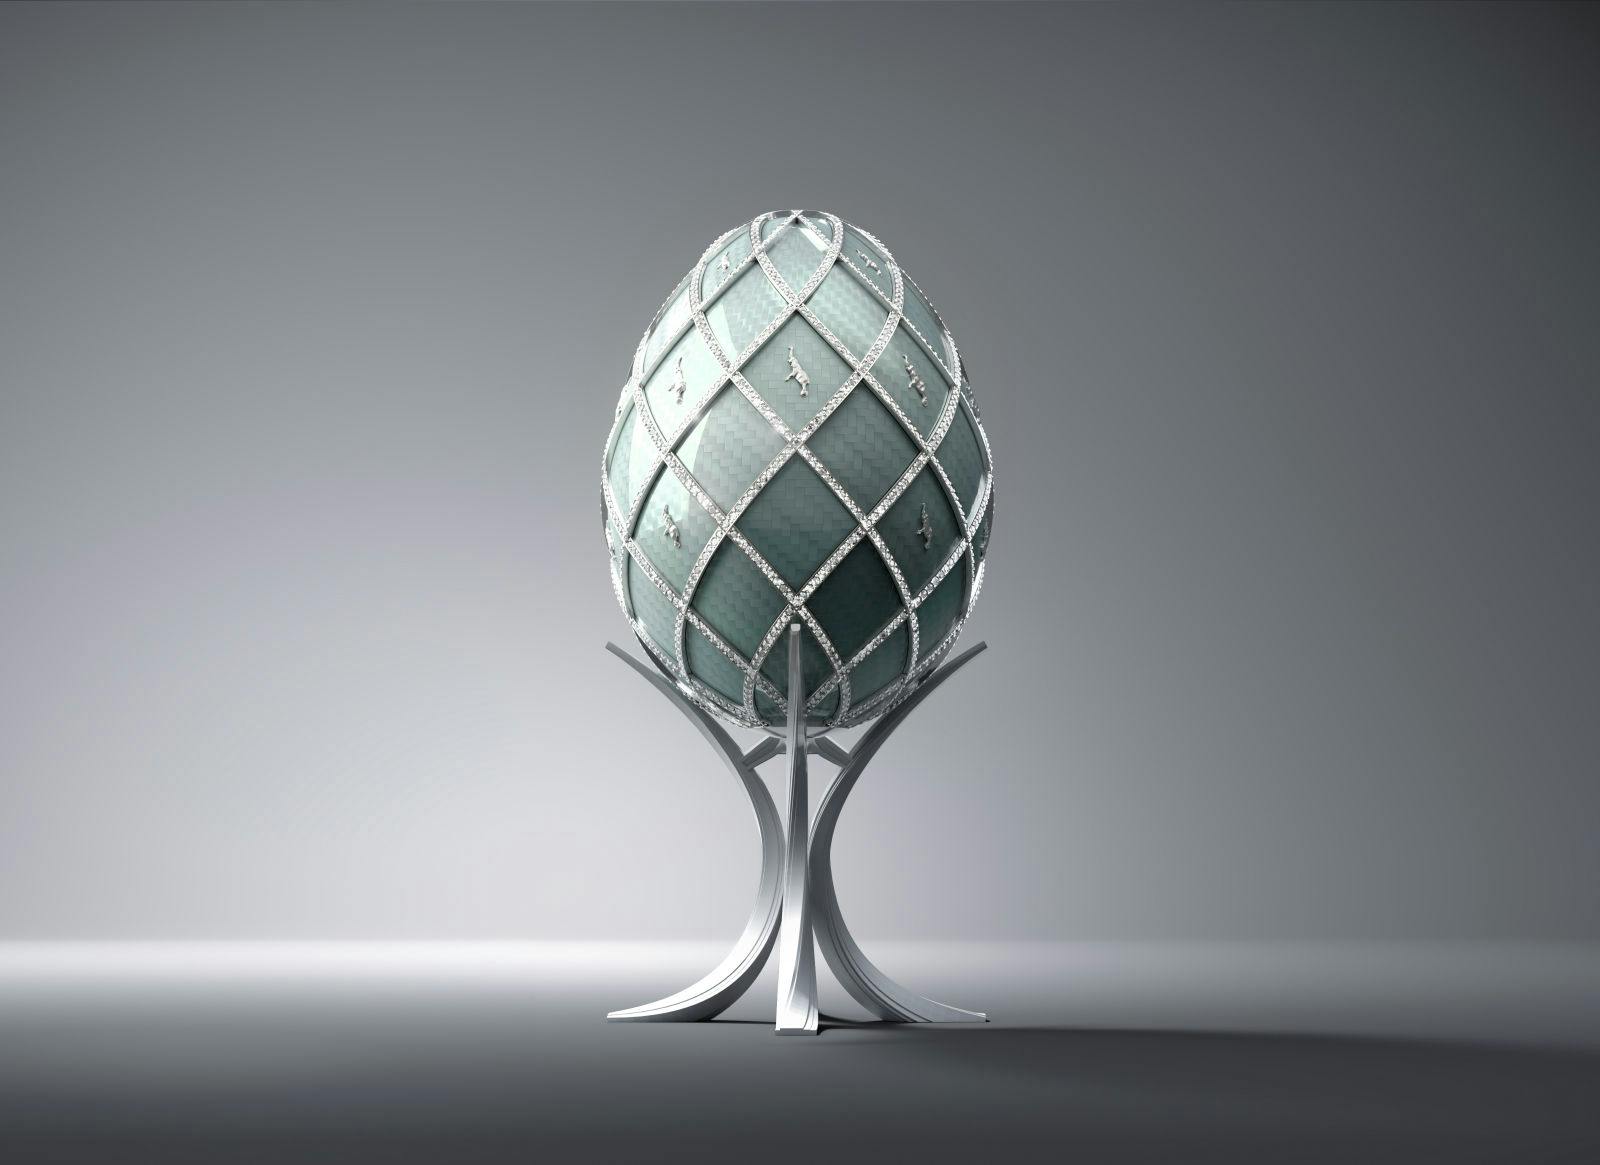 The Asprey Bugatti Egg Collection is intricately crafted into the perfect egg shape.